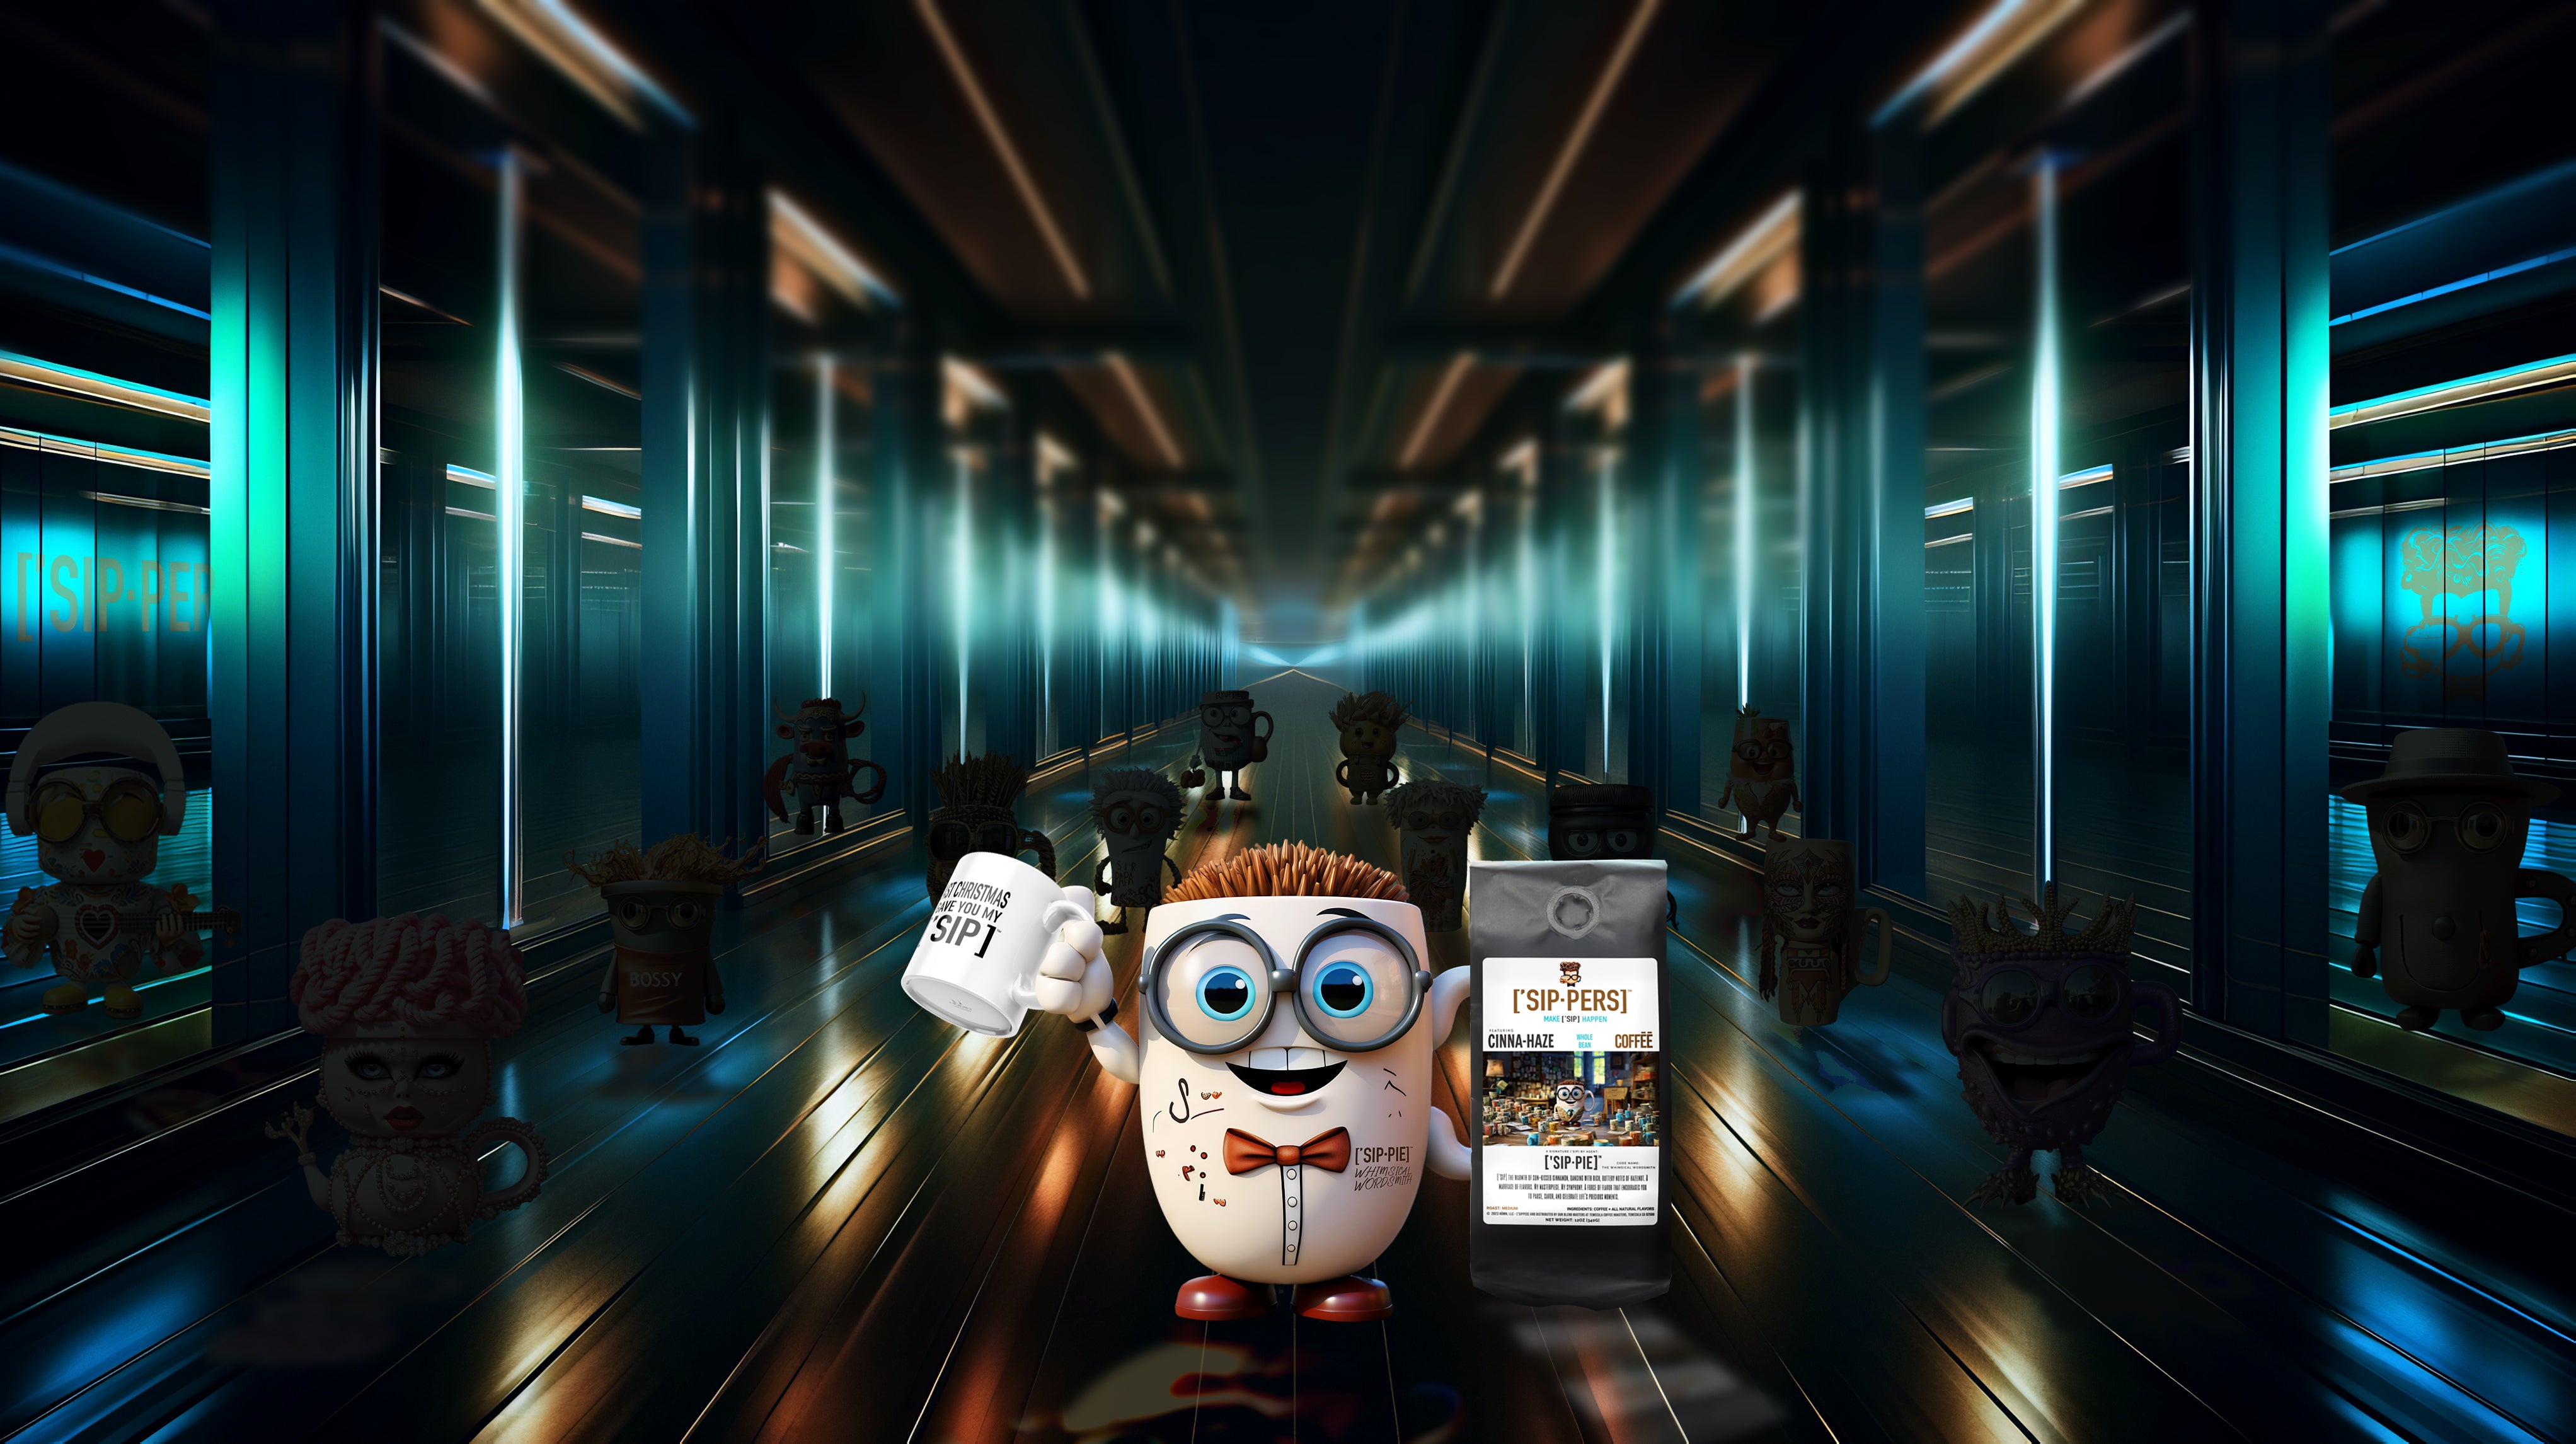 A futuristic room with a coffee mug character called Sippie, holding his mug and coffee bag products with a group of coffee mug characters behind him.